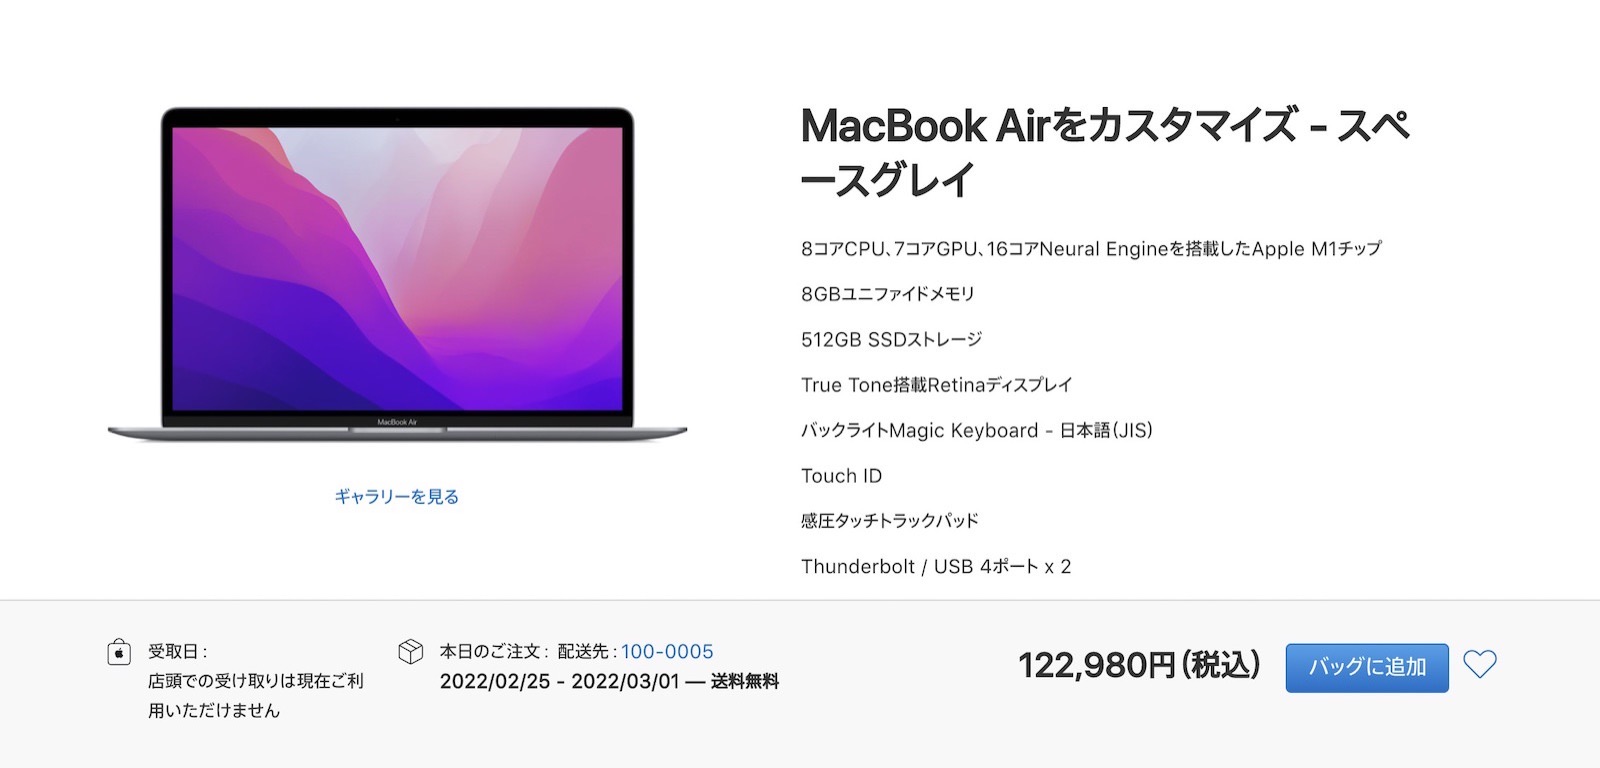 Macbook air spec for students